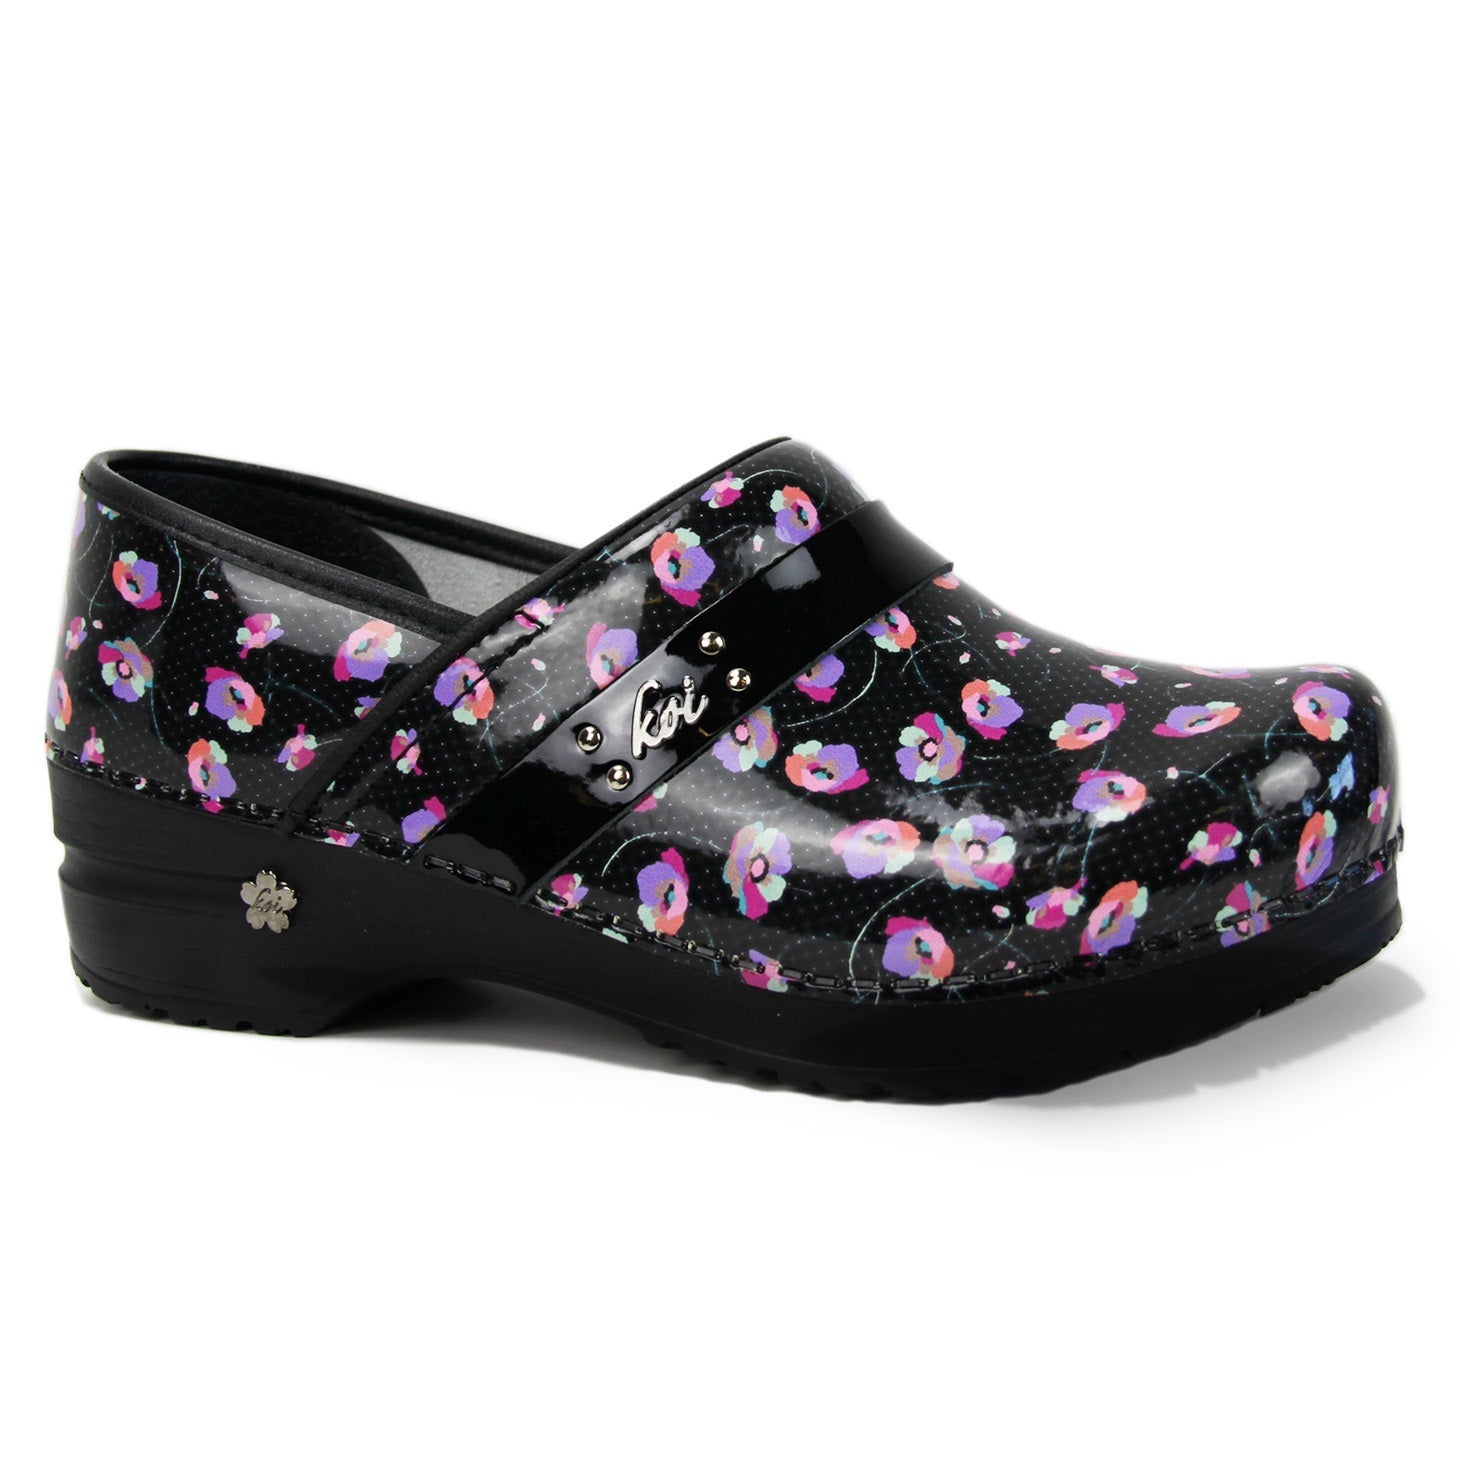 Sanita Dotted Poppies Women's in Multicolor - Avail Fall '22 Closed Back Clog